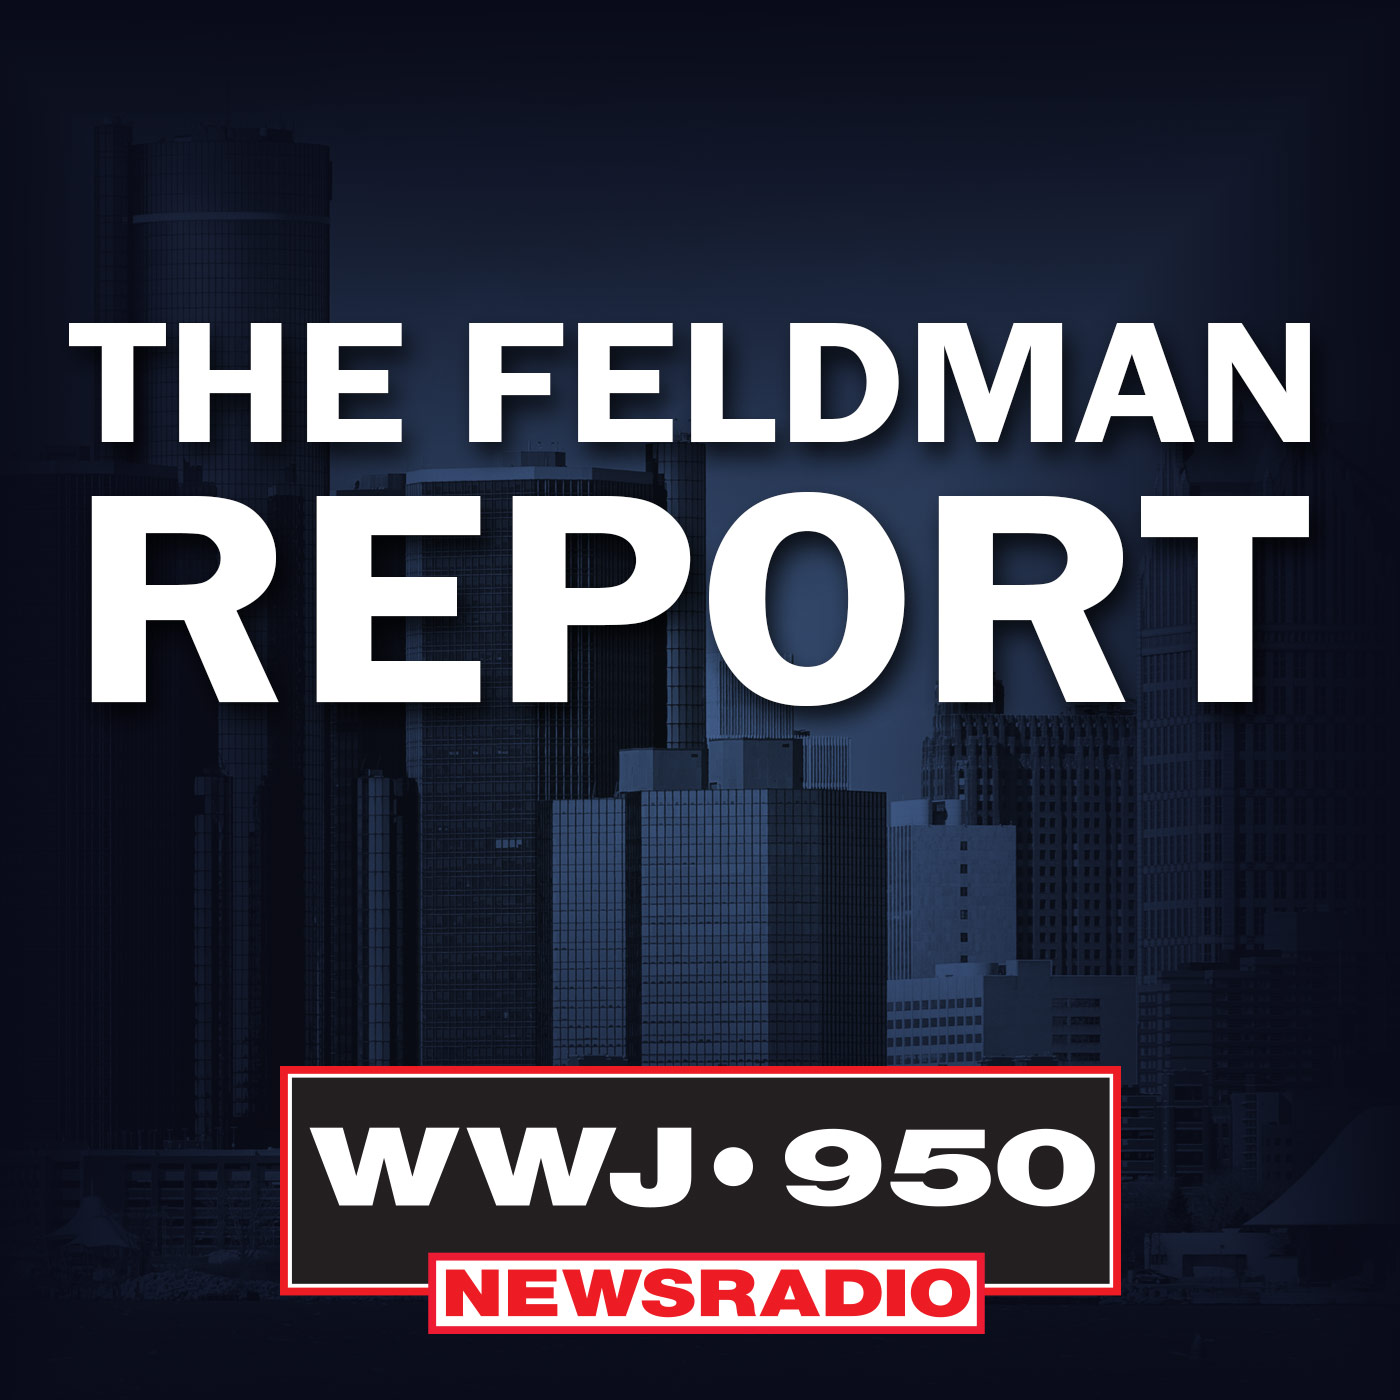 Feldman Report: More businesses are hit by crime, and many are hit from within